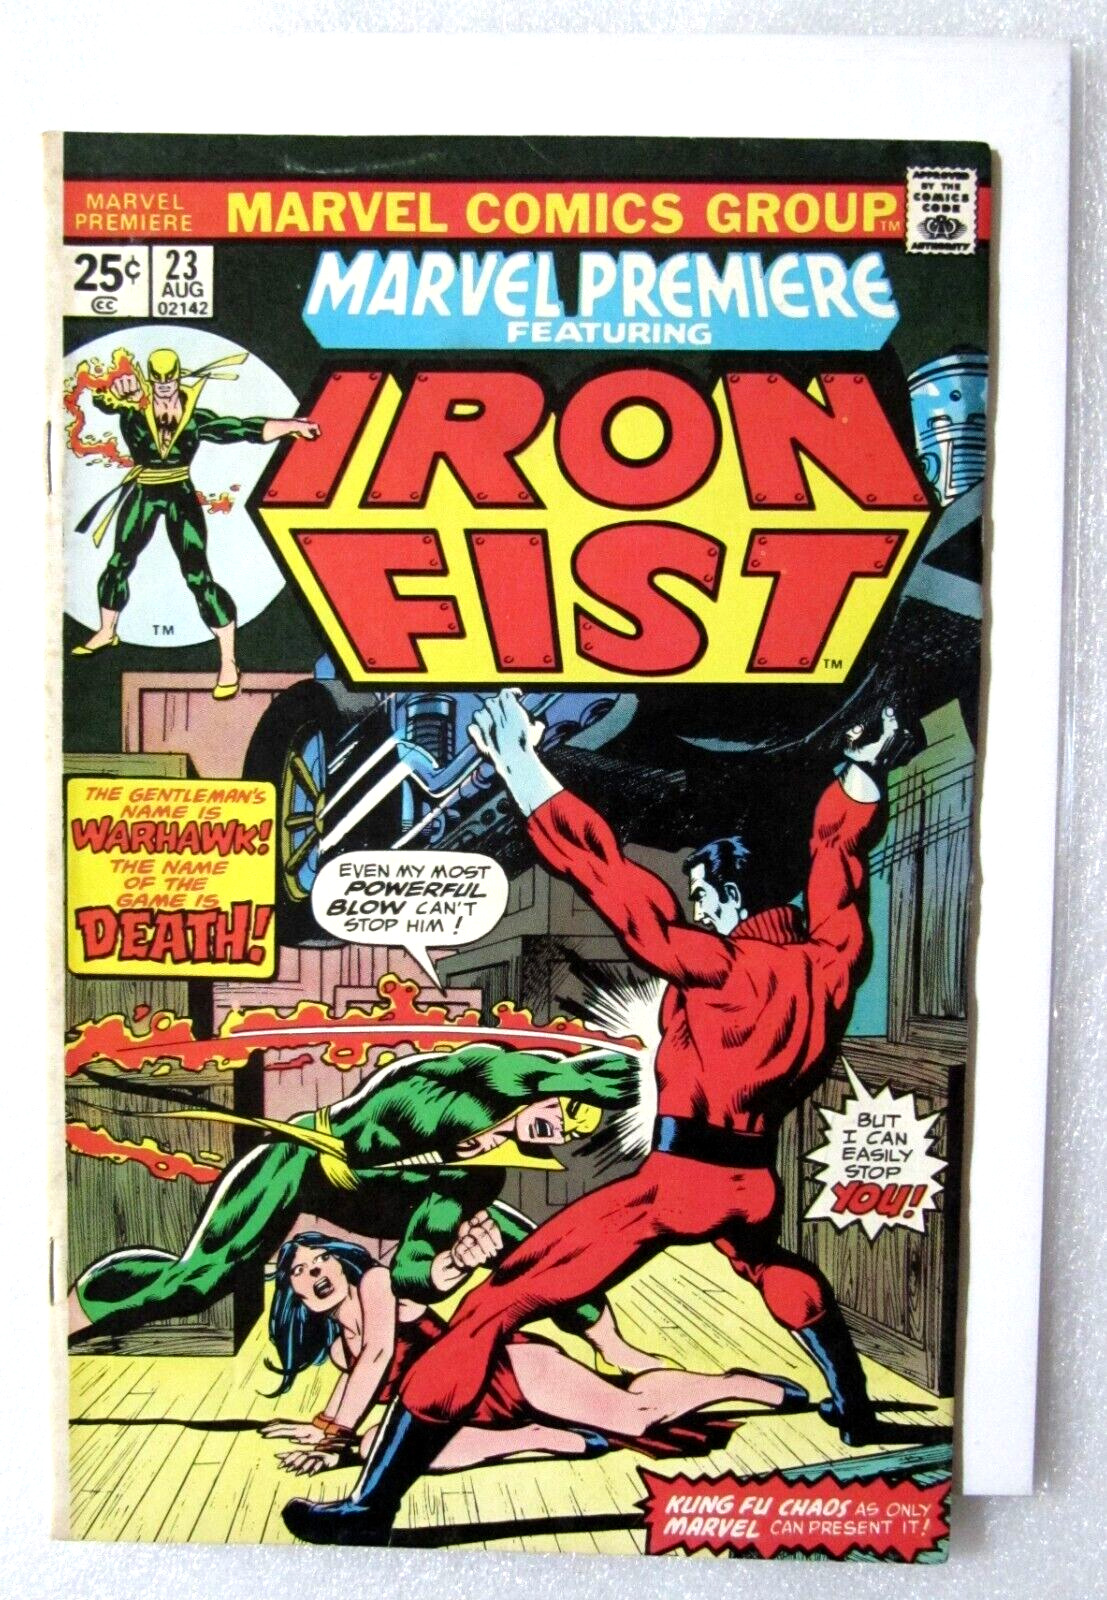 BRONZE AGE COMIC 1975 MARVEL PREMIERE #23 IRON FIRST - PAT BRODERICK - BOARDED